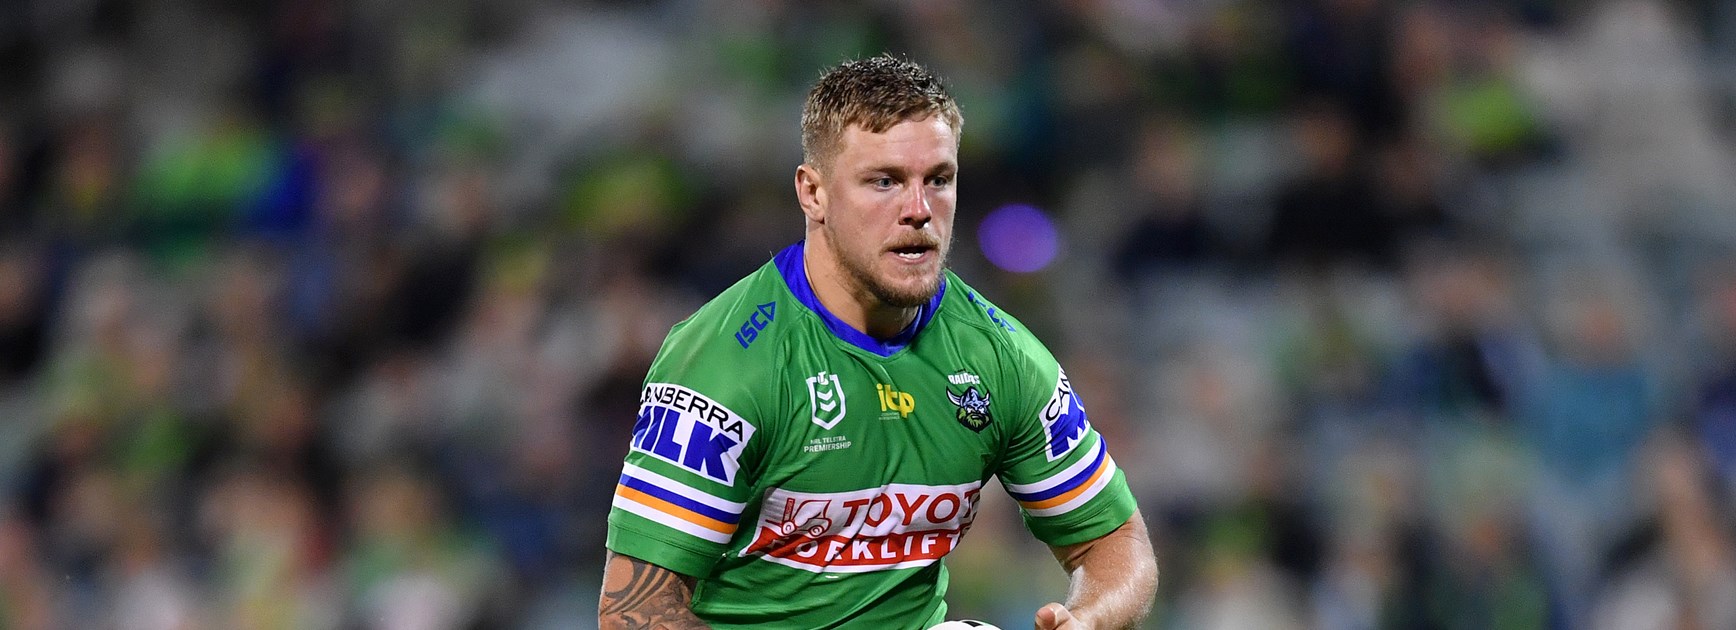 Sutton excited for Rushton's NRL debut this weekend